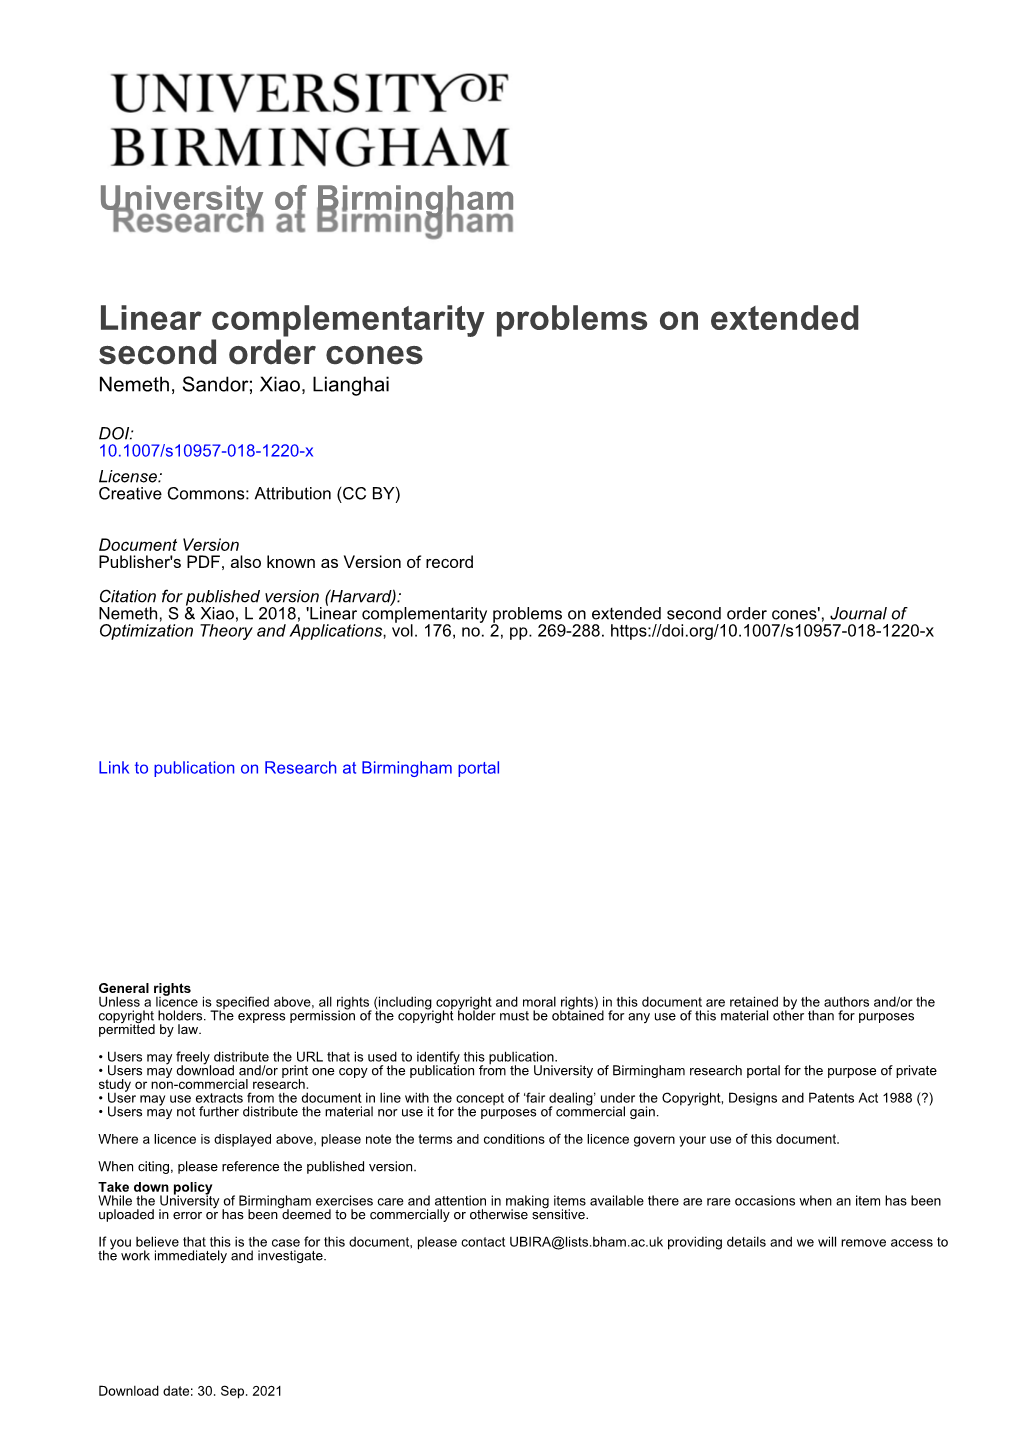 Linear Complementarity Problems on Extended Second Order Cones Nemeth, Sandor; Xiao, Lianghai